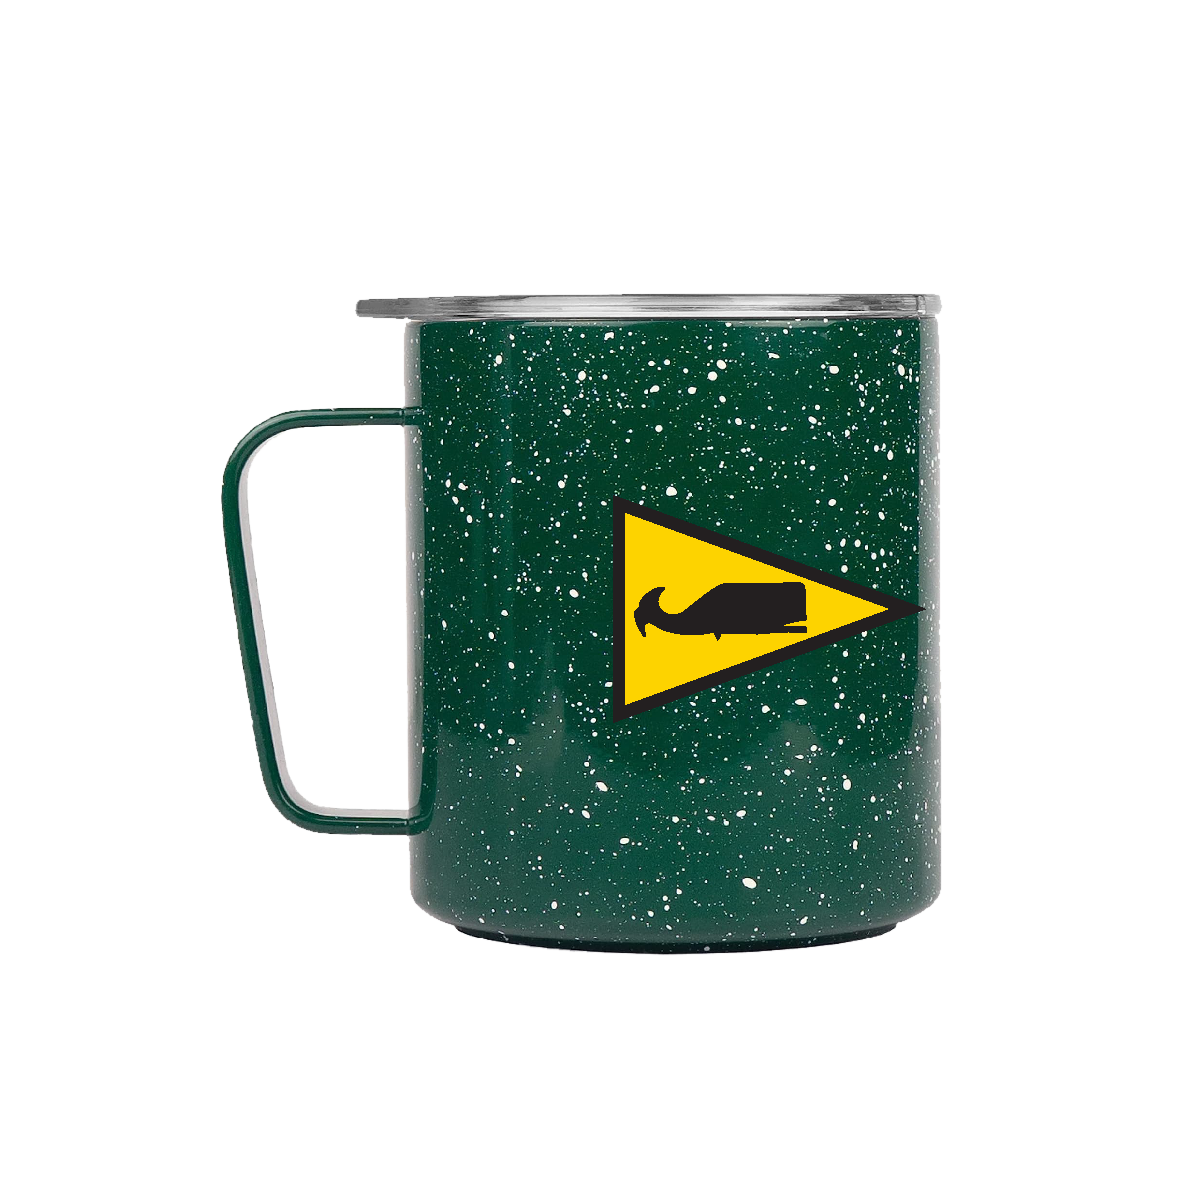 What's All the Buzz About 12 oz Coffee Mugs?